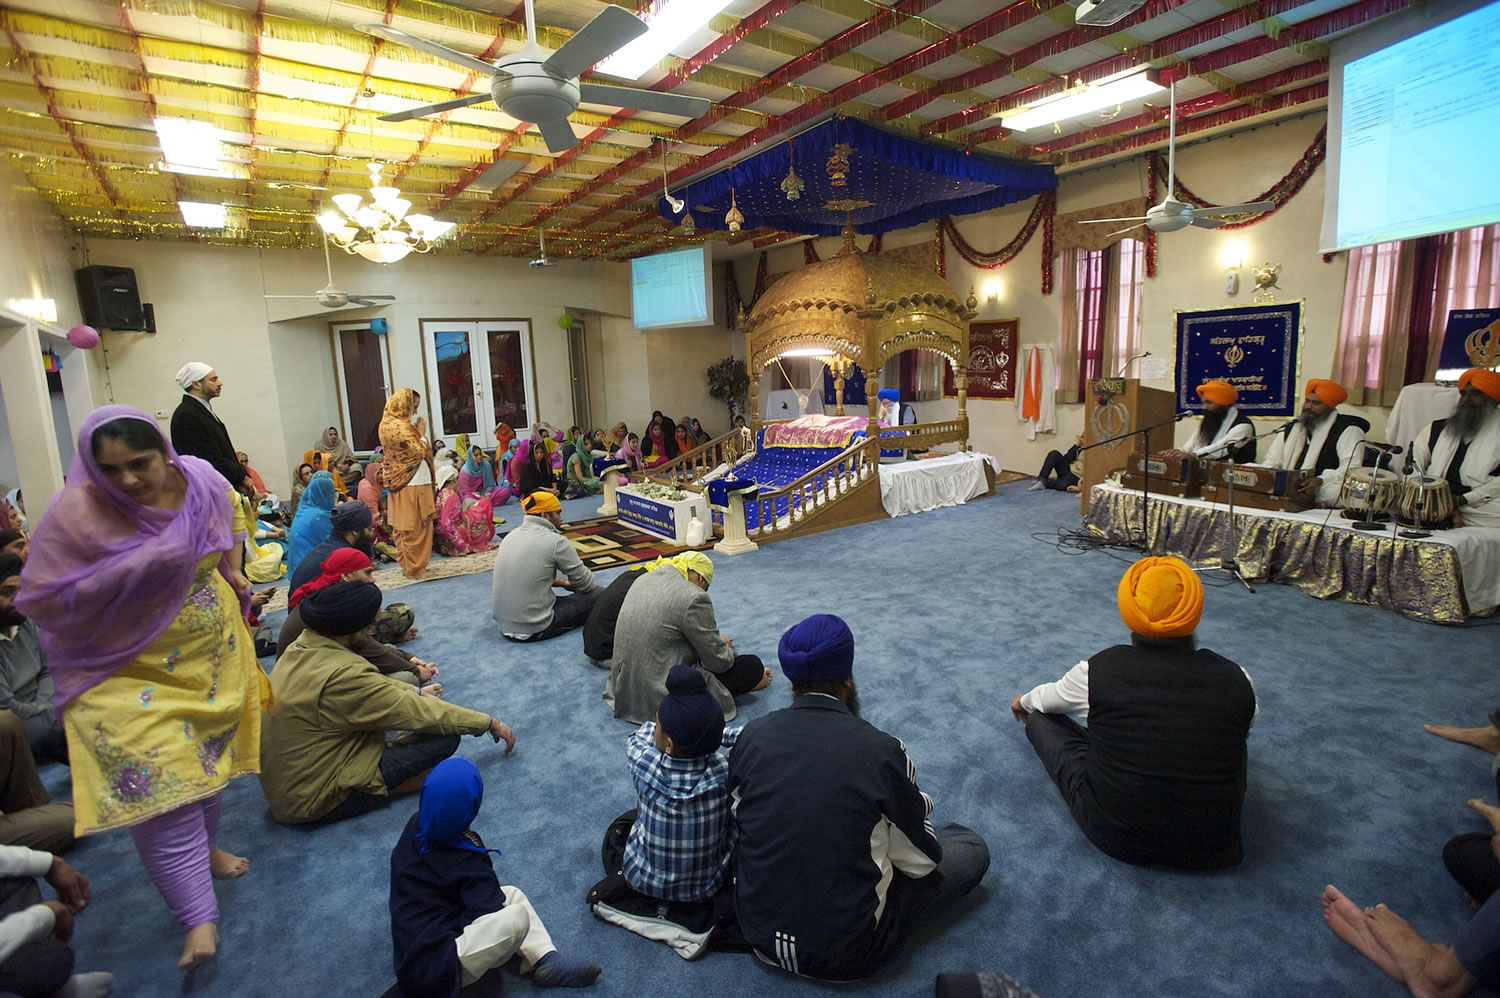 The annual Sikh festival called Vaisakhi, celebrated in mid-April at Vancouver's Guru Ramdass Gurdwara, is a celebration of the bounty to come as well as a commemoration of the founding of what's called the Khalsa -- the community of initiated Sikhs.